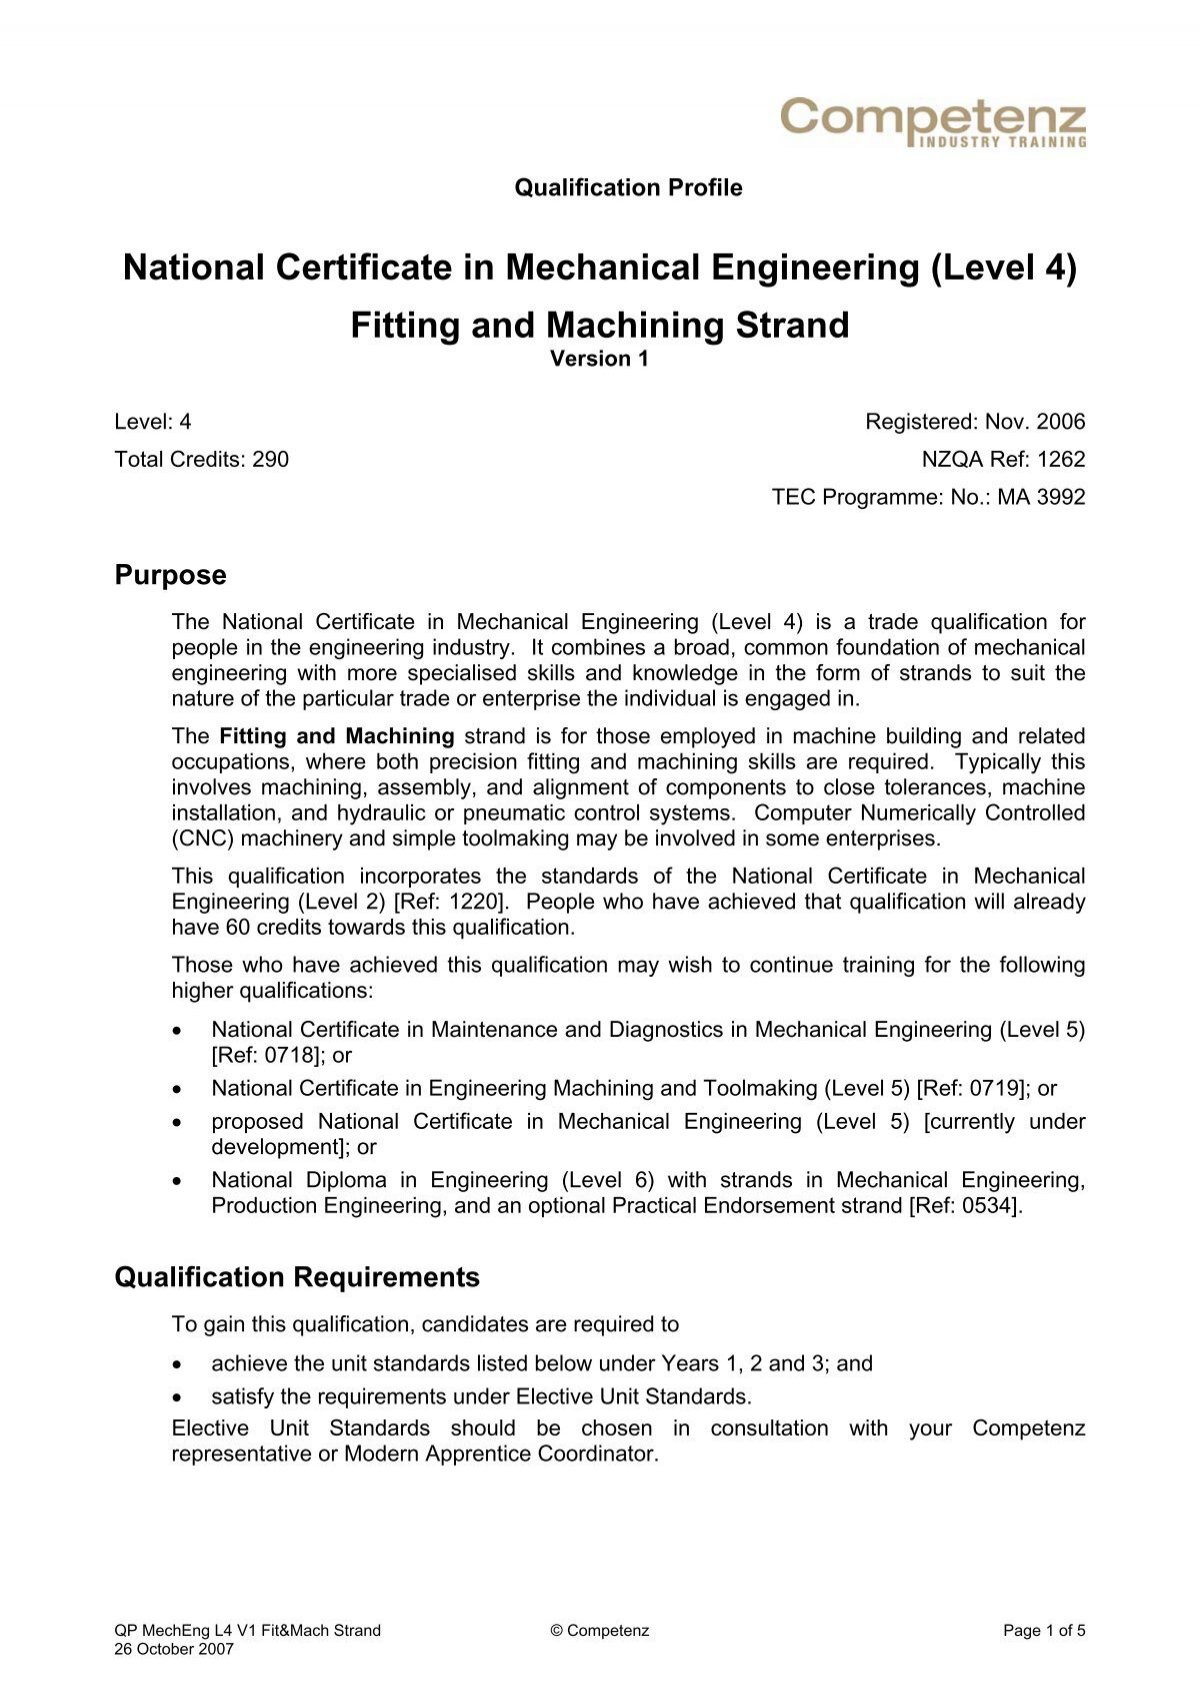 National Certificate in Mechanical Engineering (Level 4) Competenz